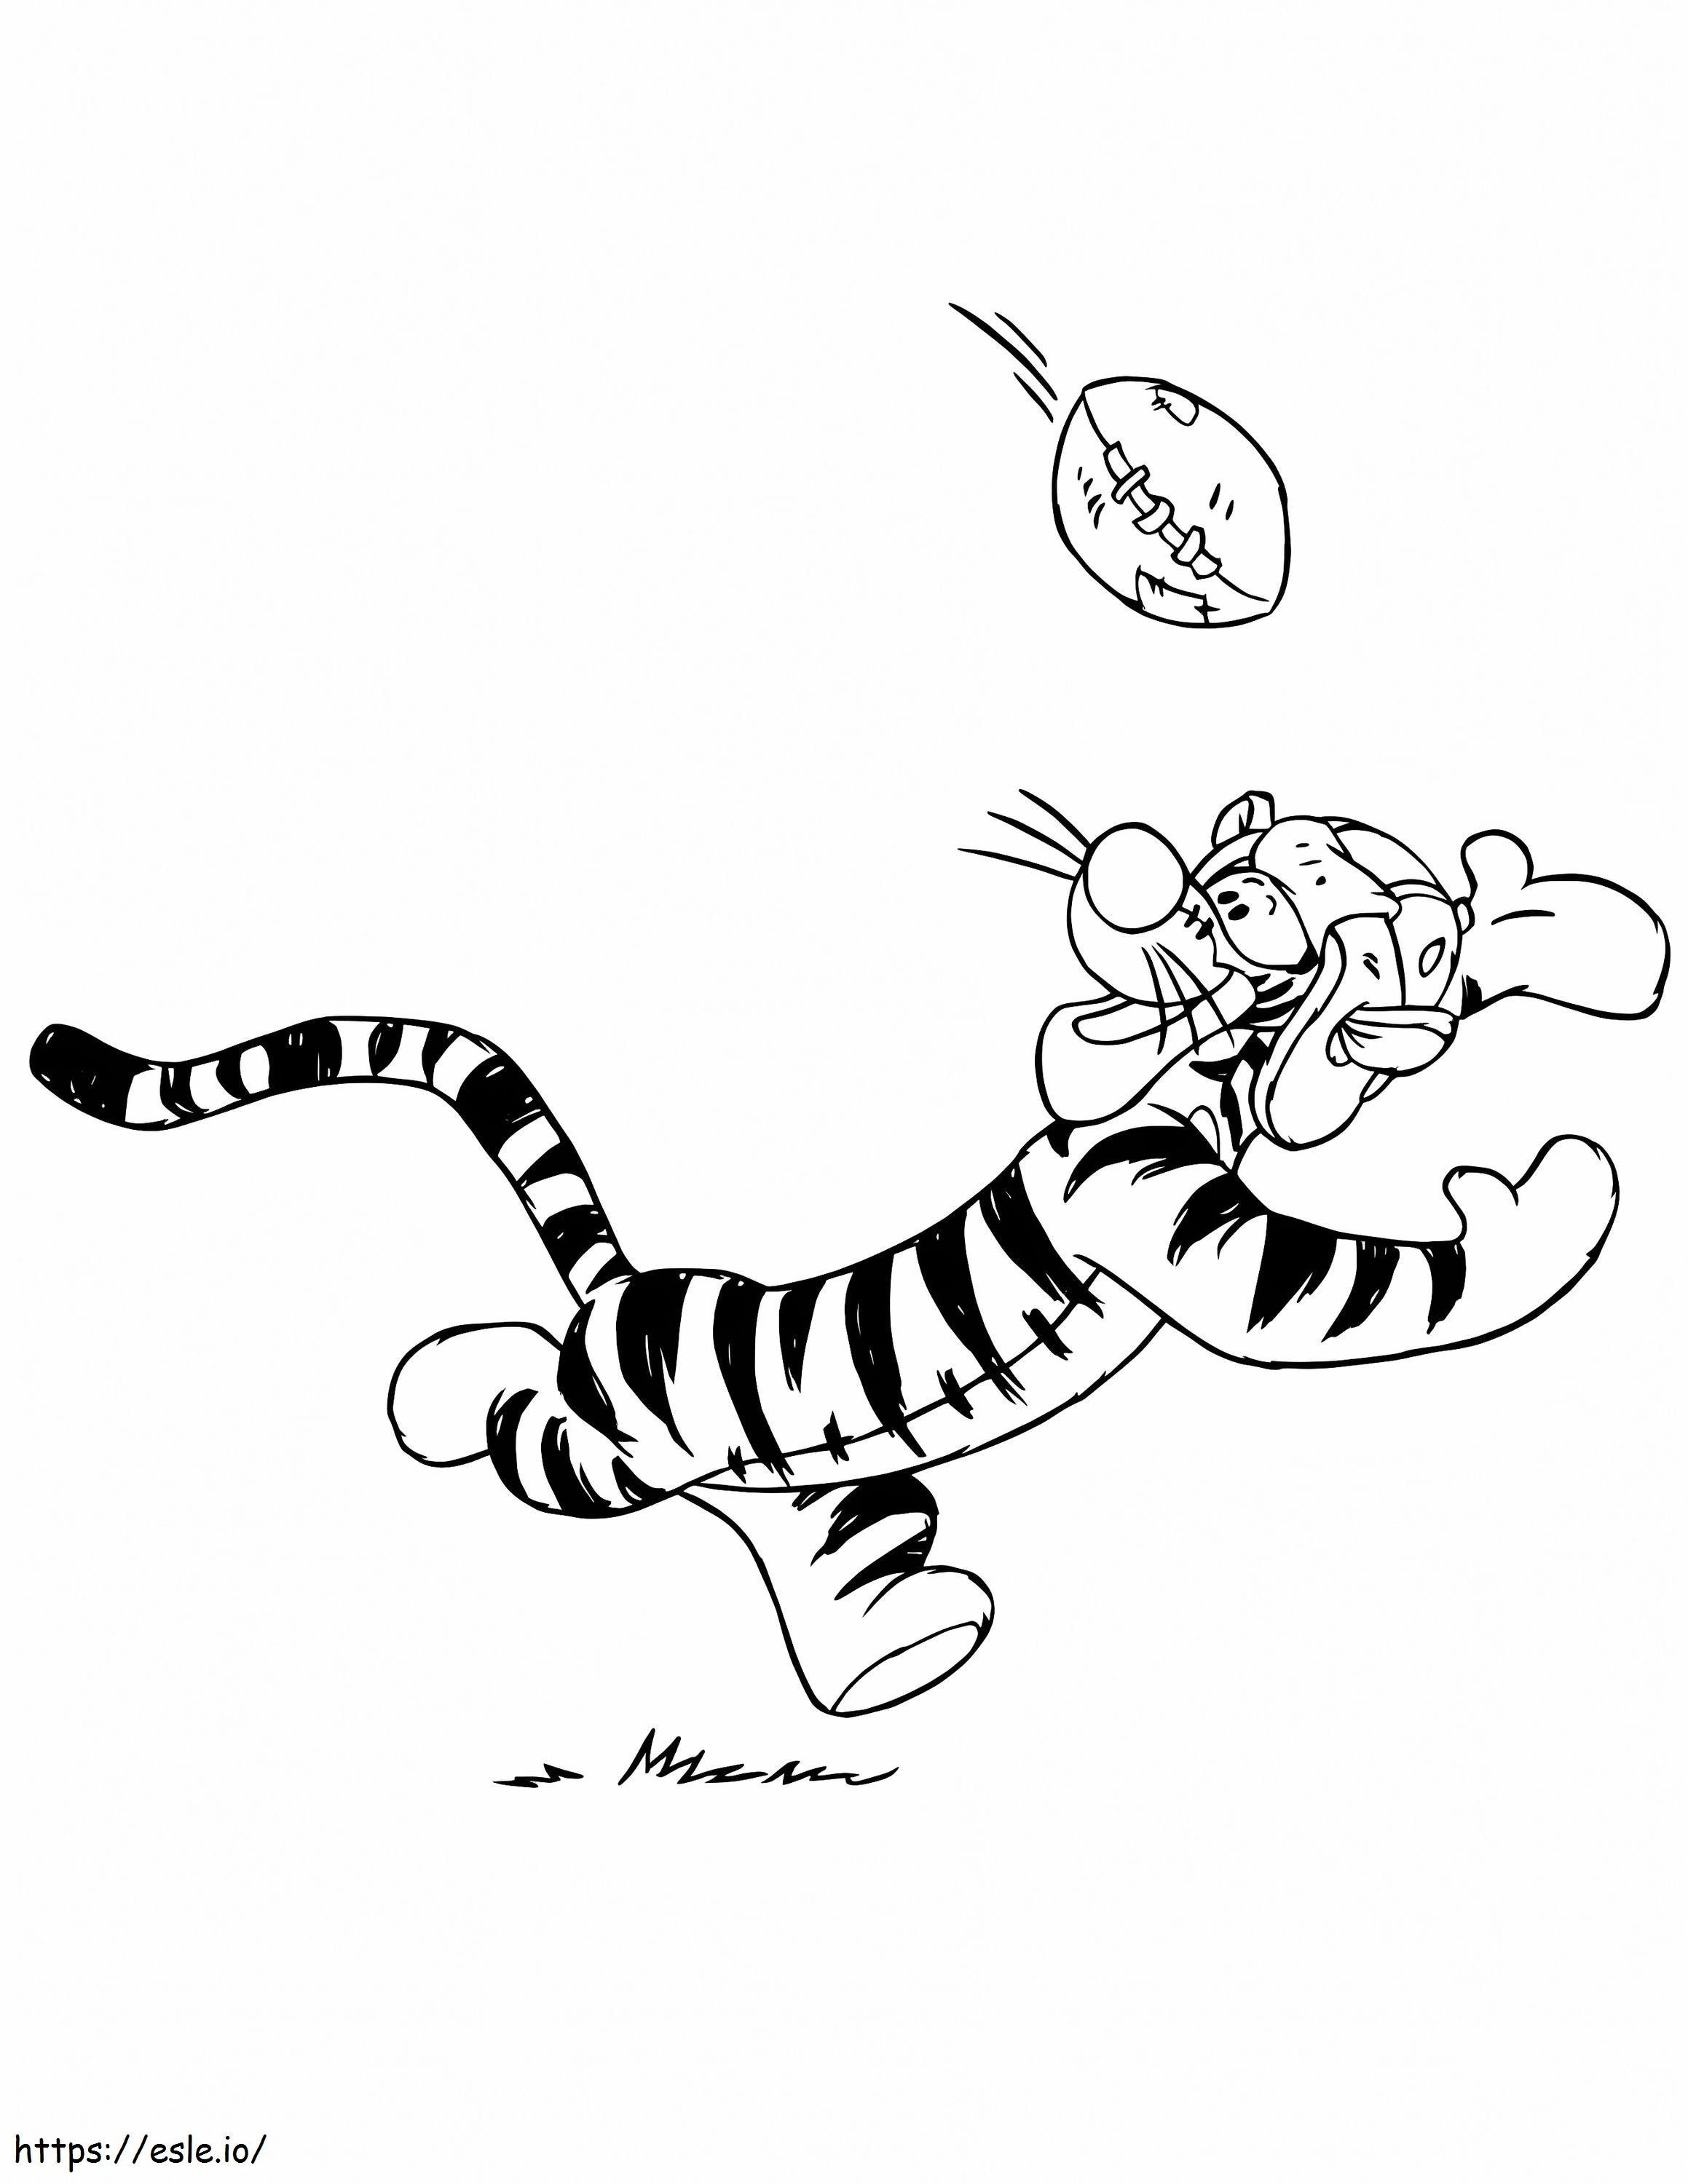 Tigger Catching Ball coloring page